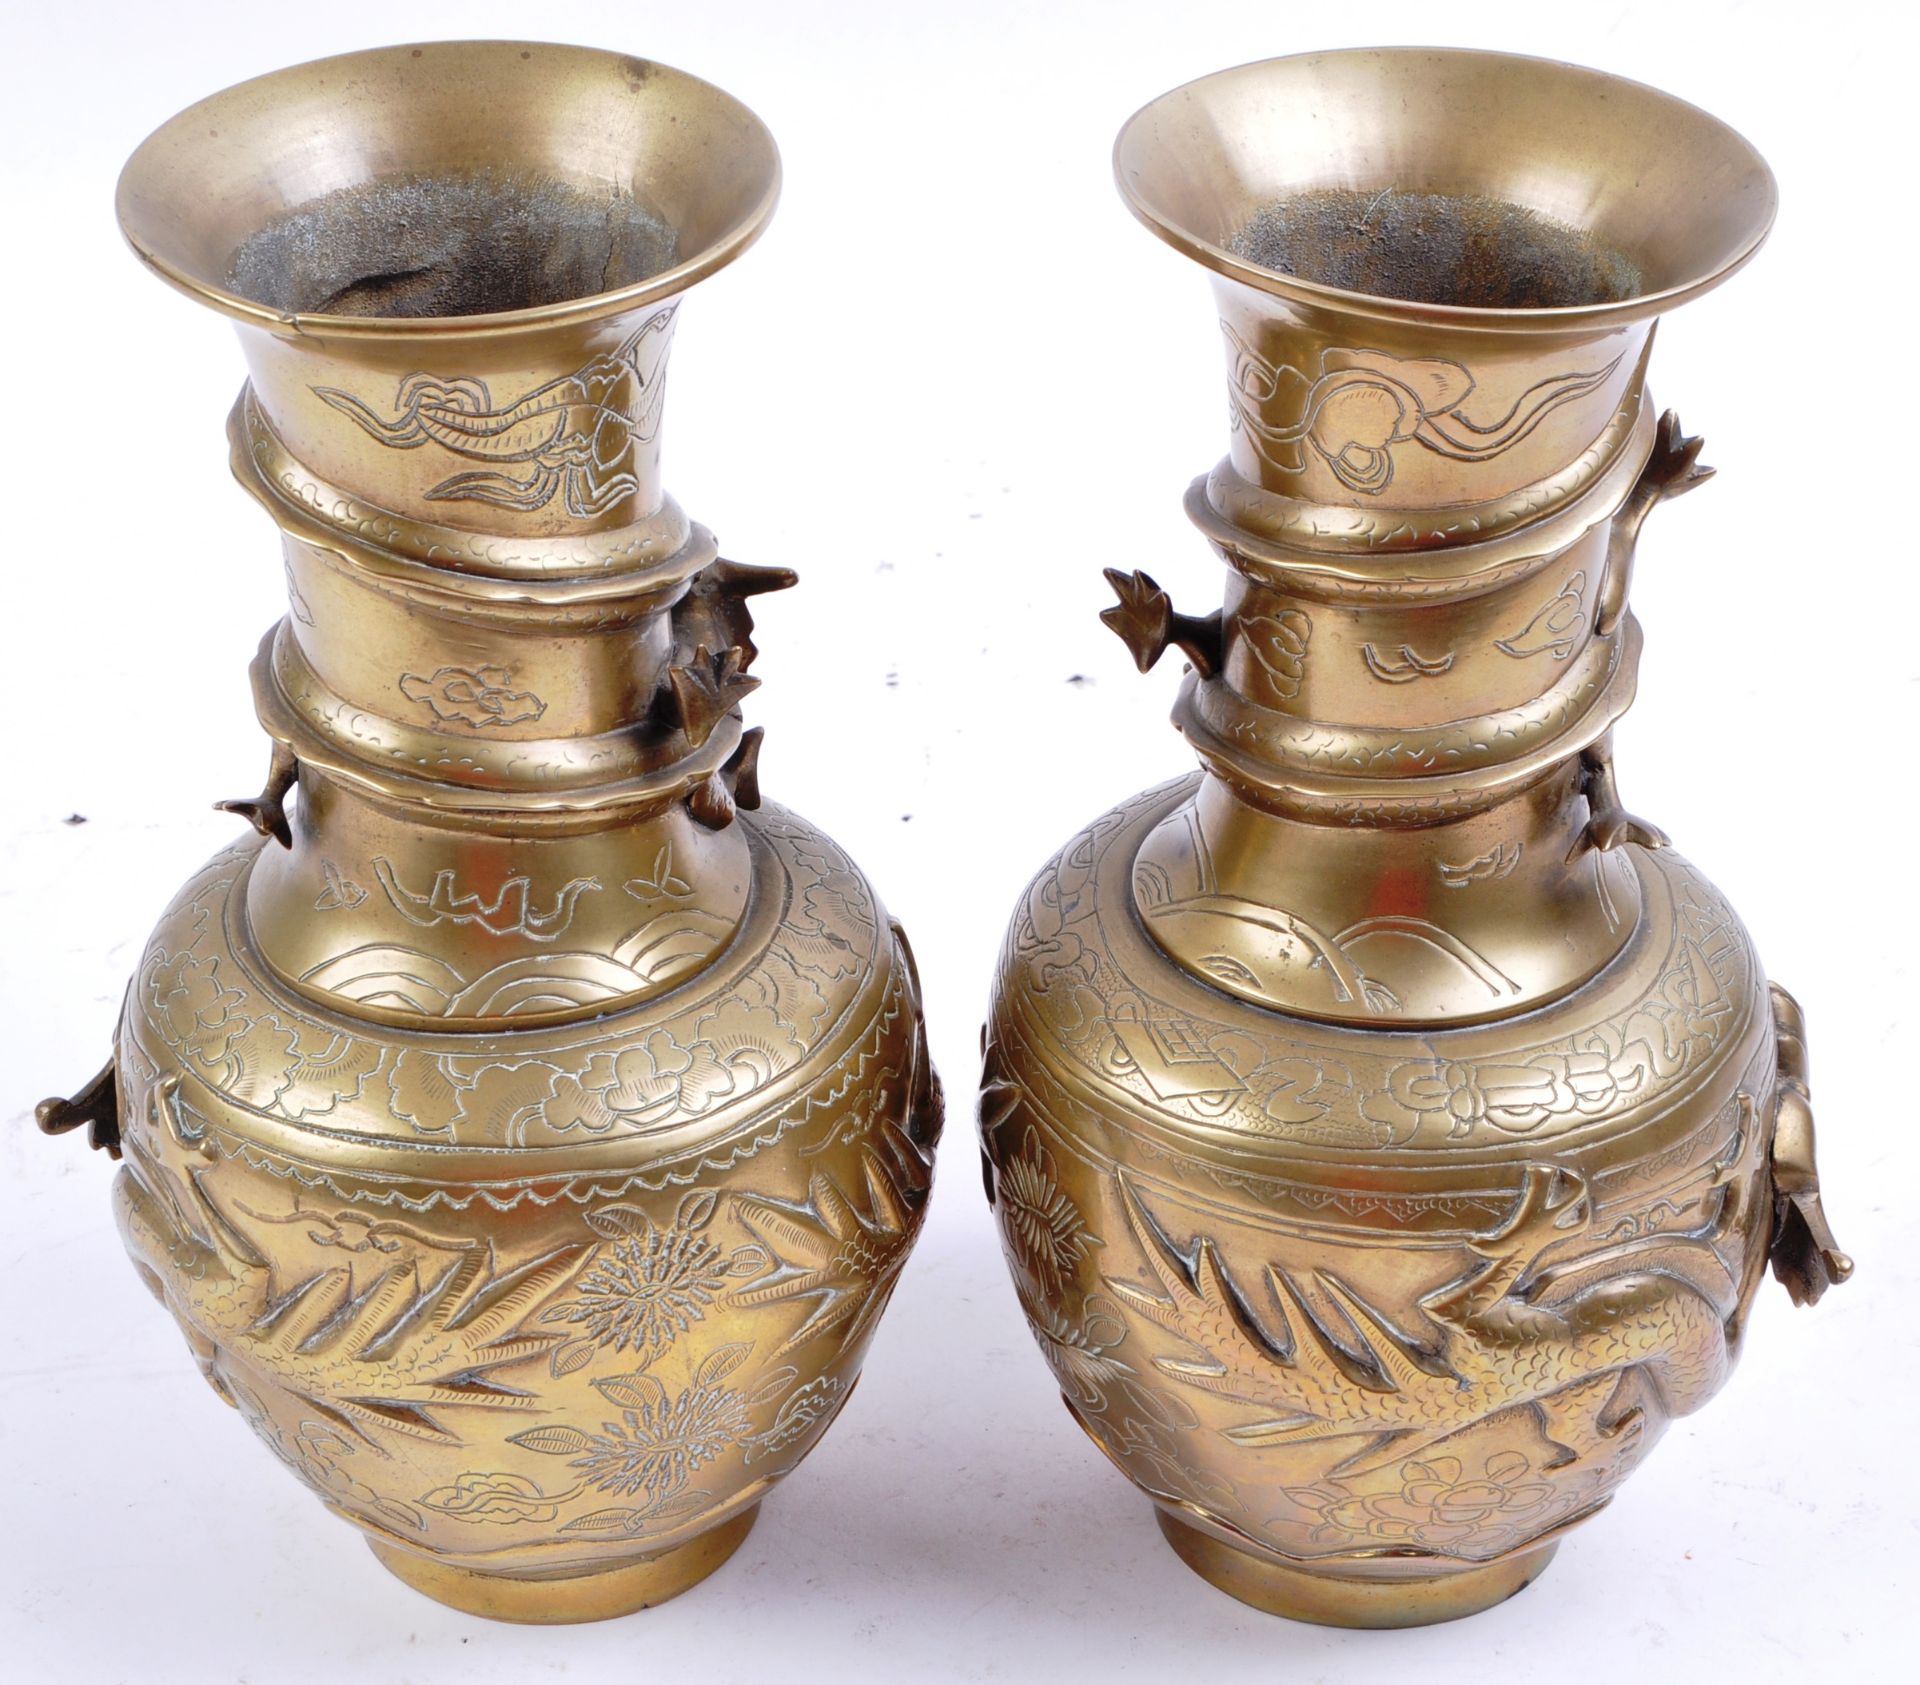 PAIR OF ANTIQUE CHINESE BRASS DRAGON VASES - Image 7 of 8